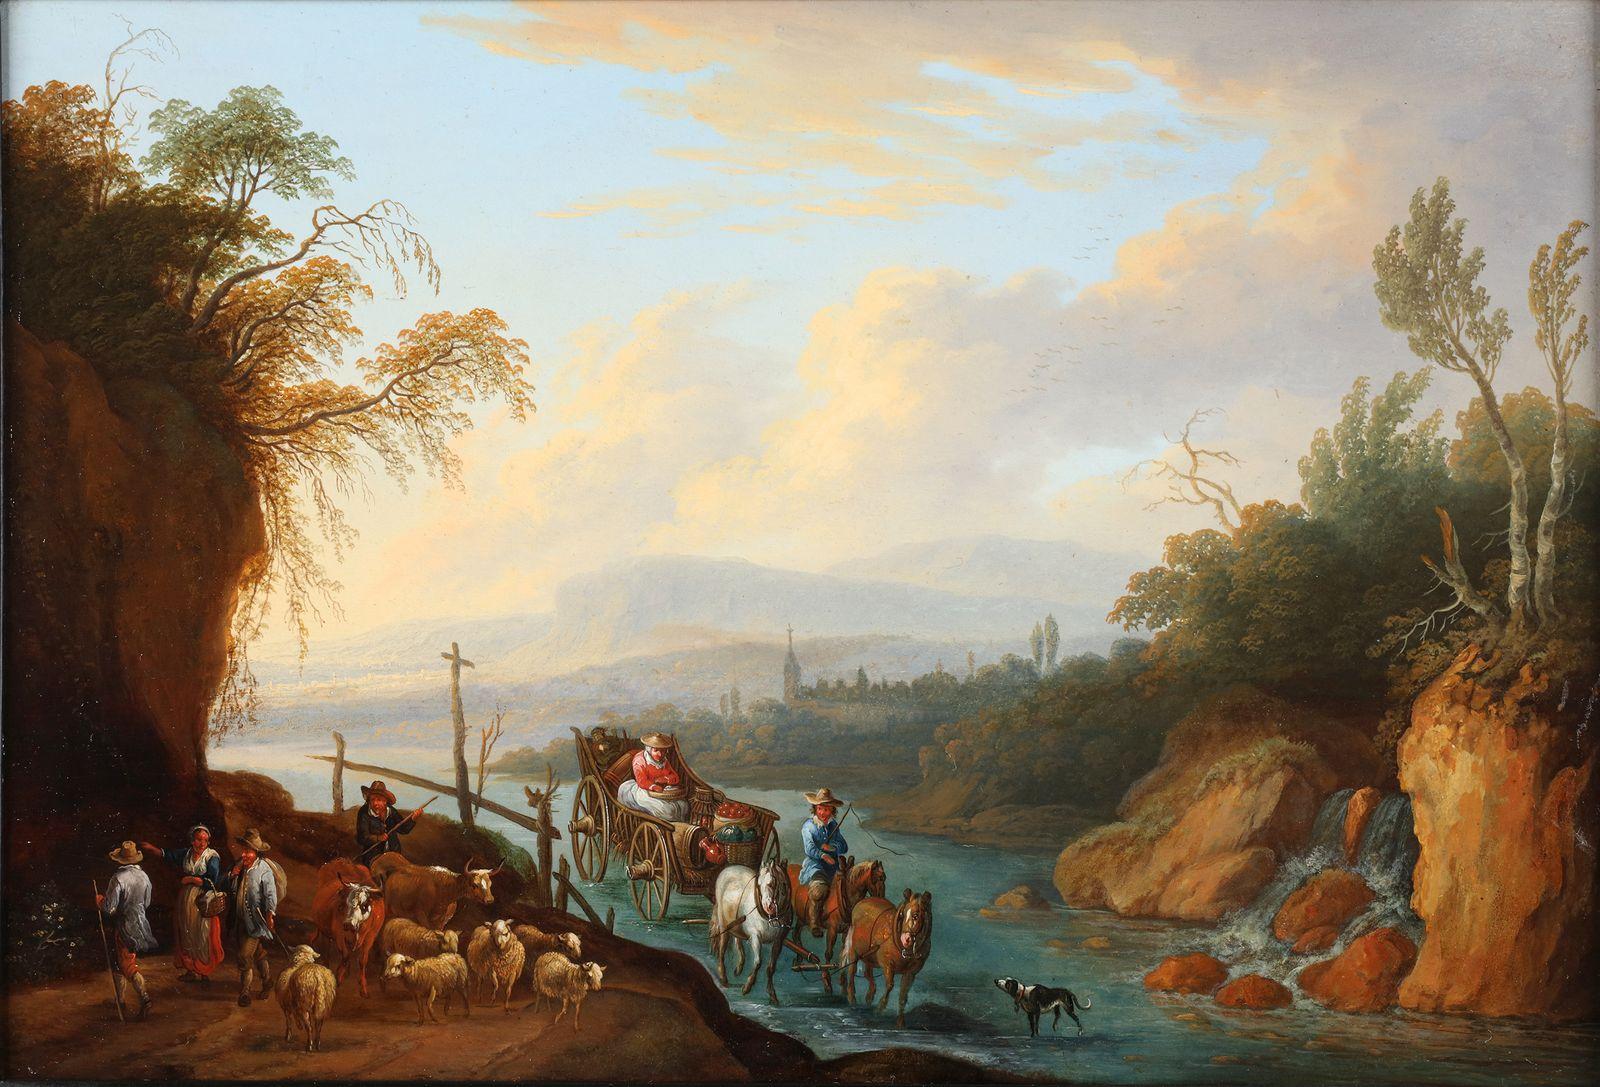 Two Sunny animated landscapes with travellers with a river view, a town beyond  - Old Masters Painting by Joseph Orient